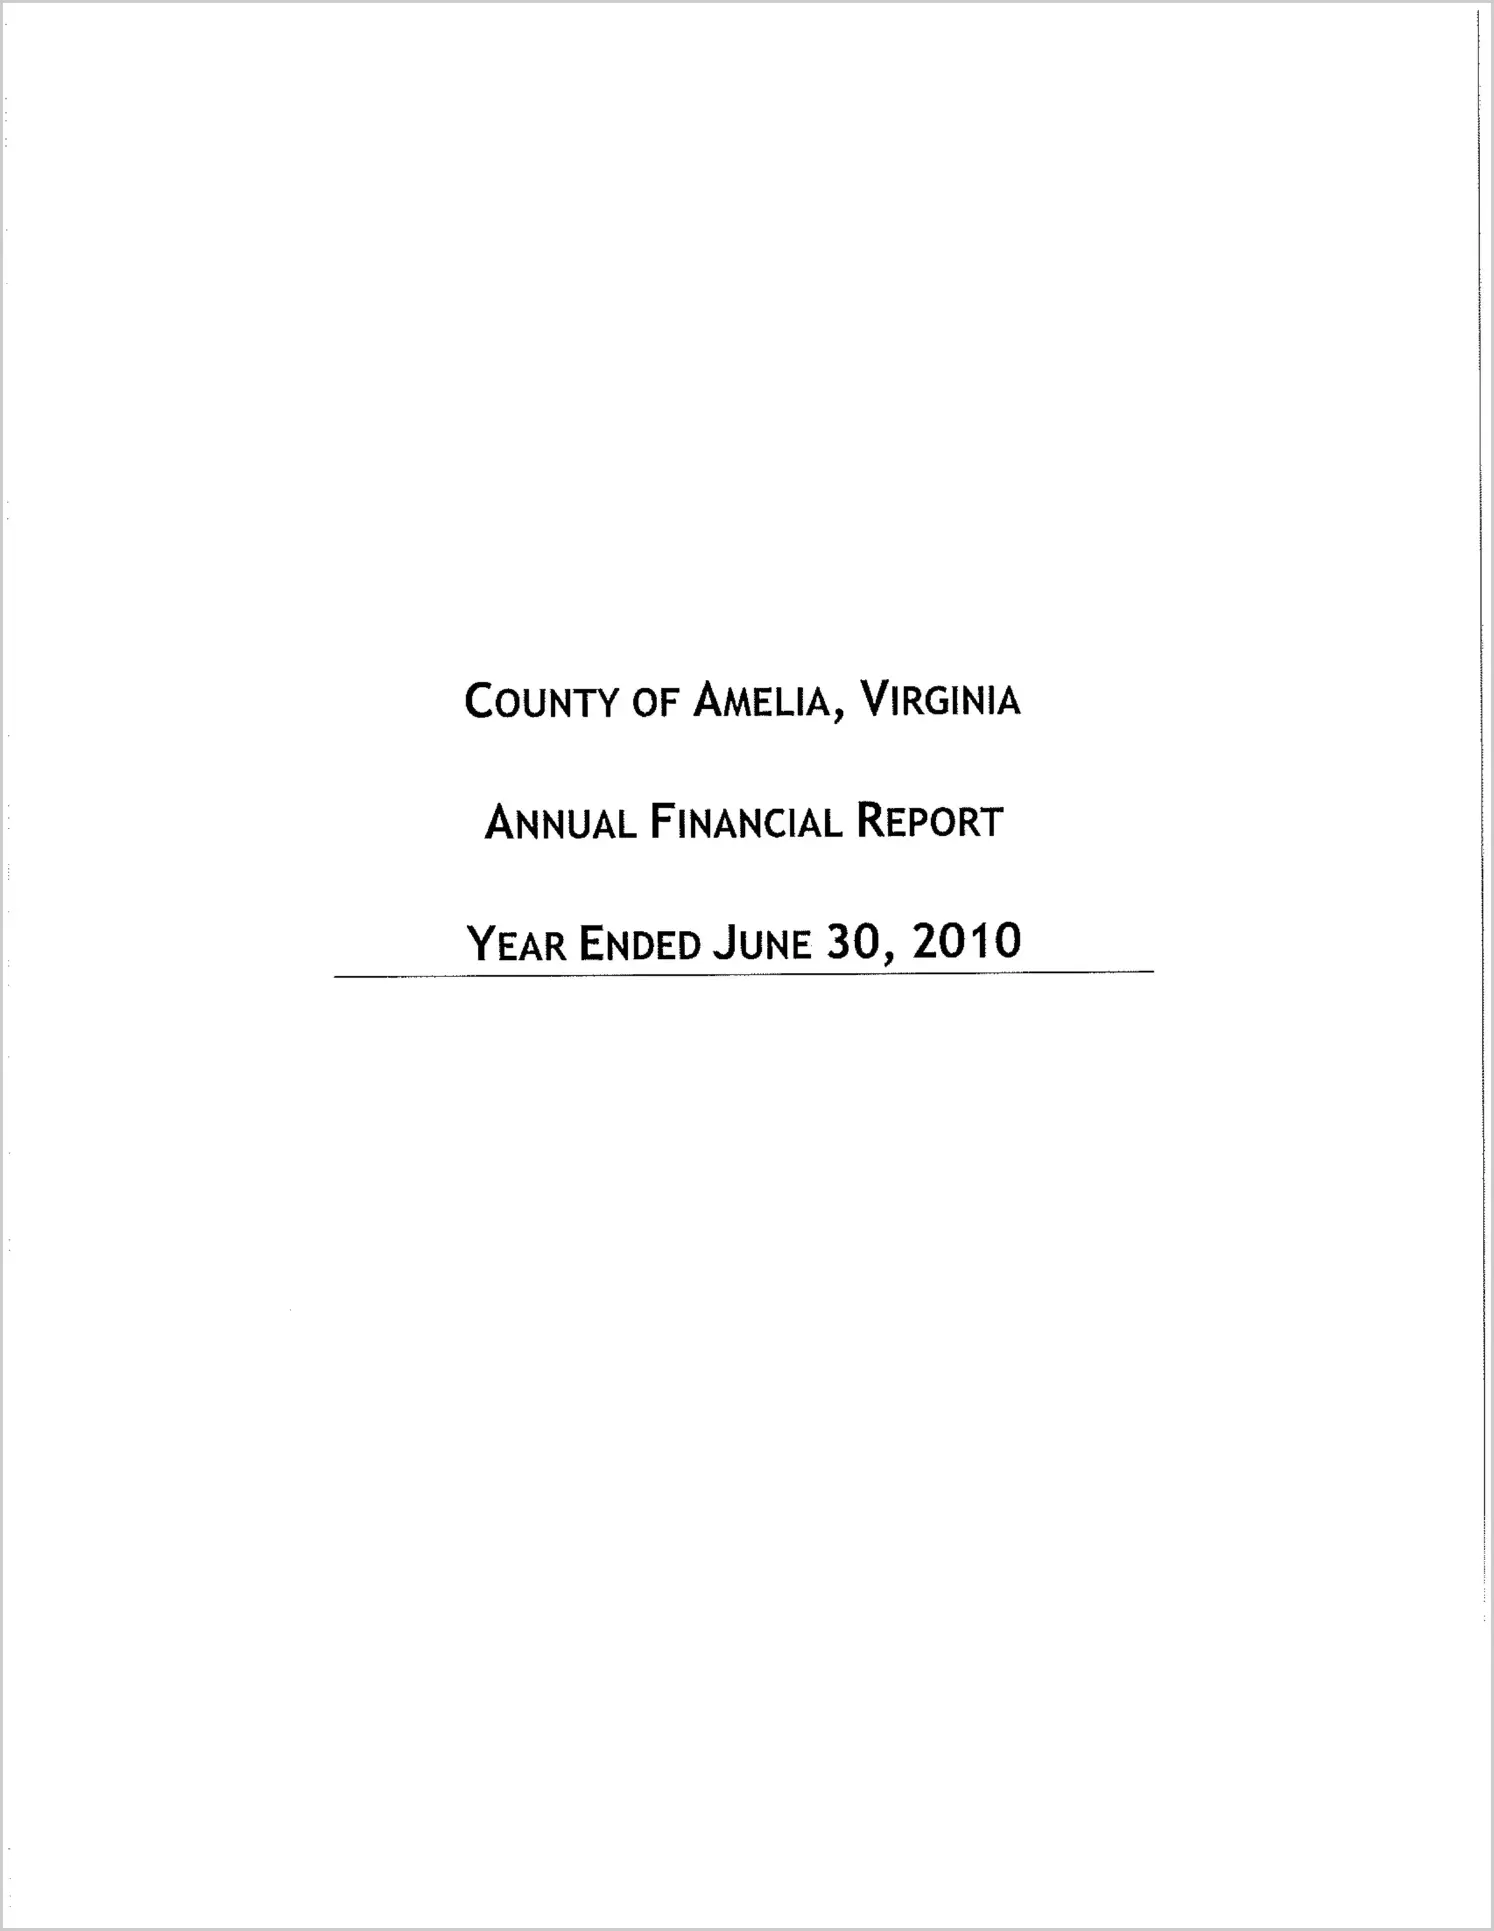 2010 Annual Financial Report for County of Amelia